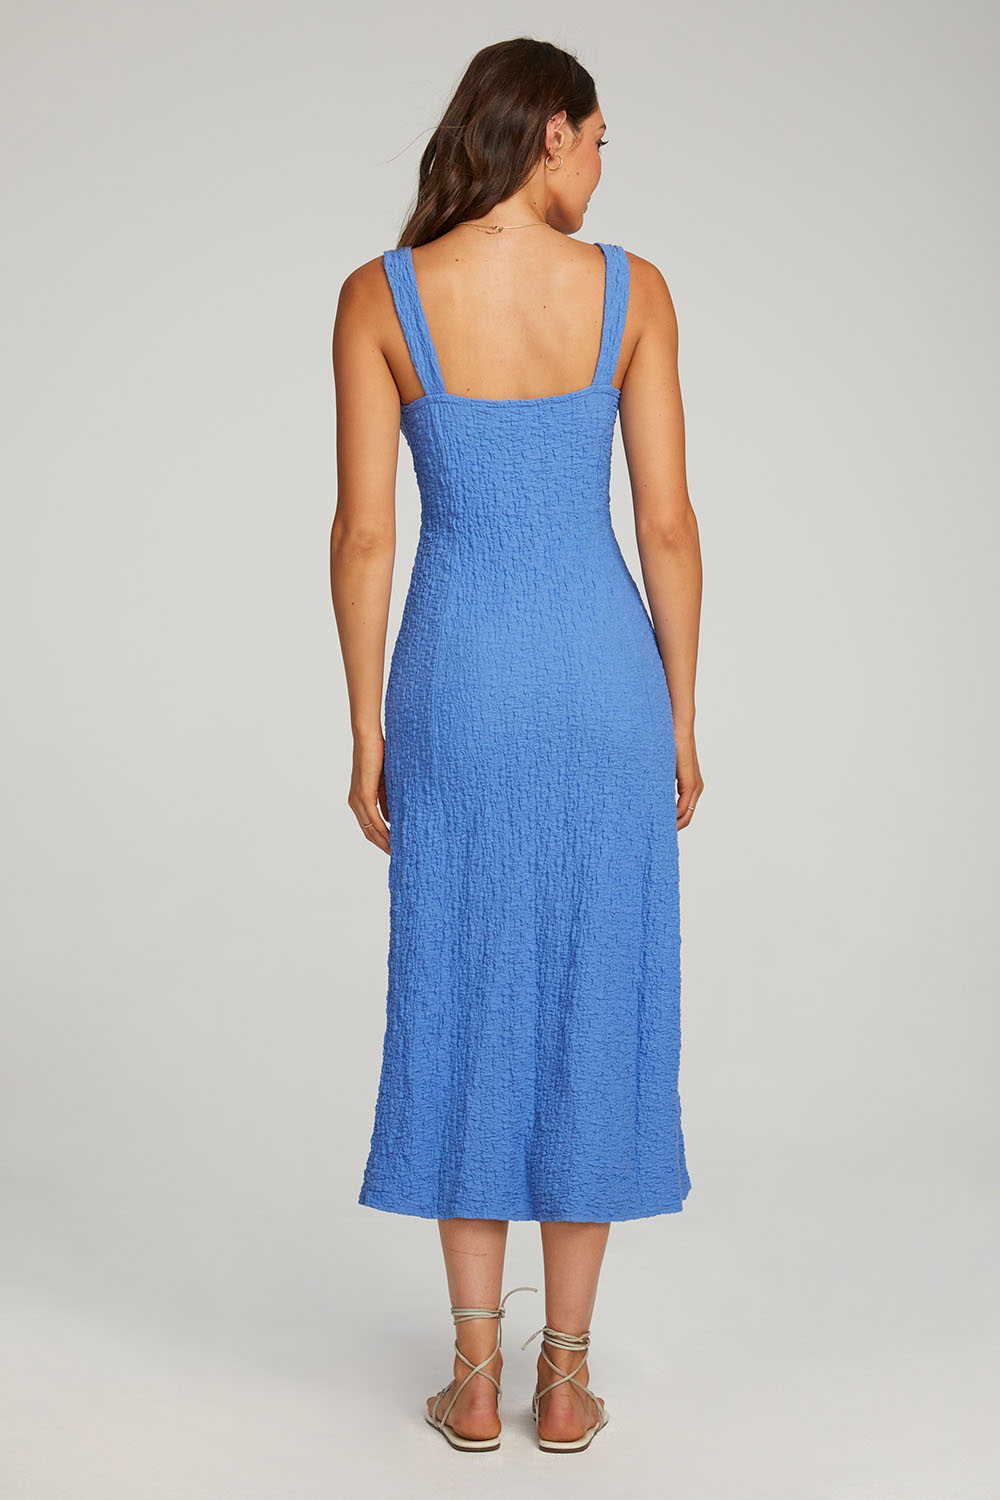 Saltwater Luxe - Cannan Midi Dress - Pacific - Back